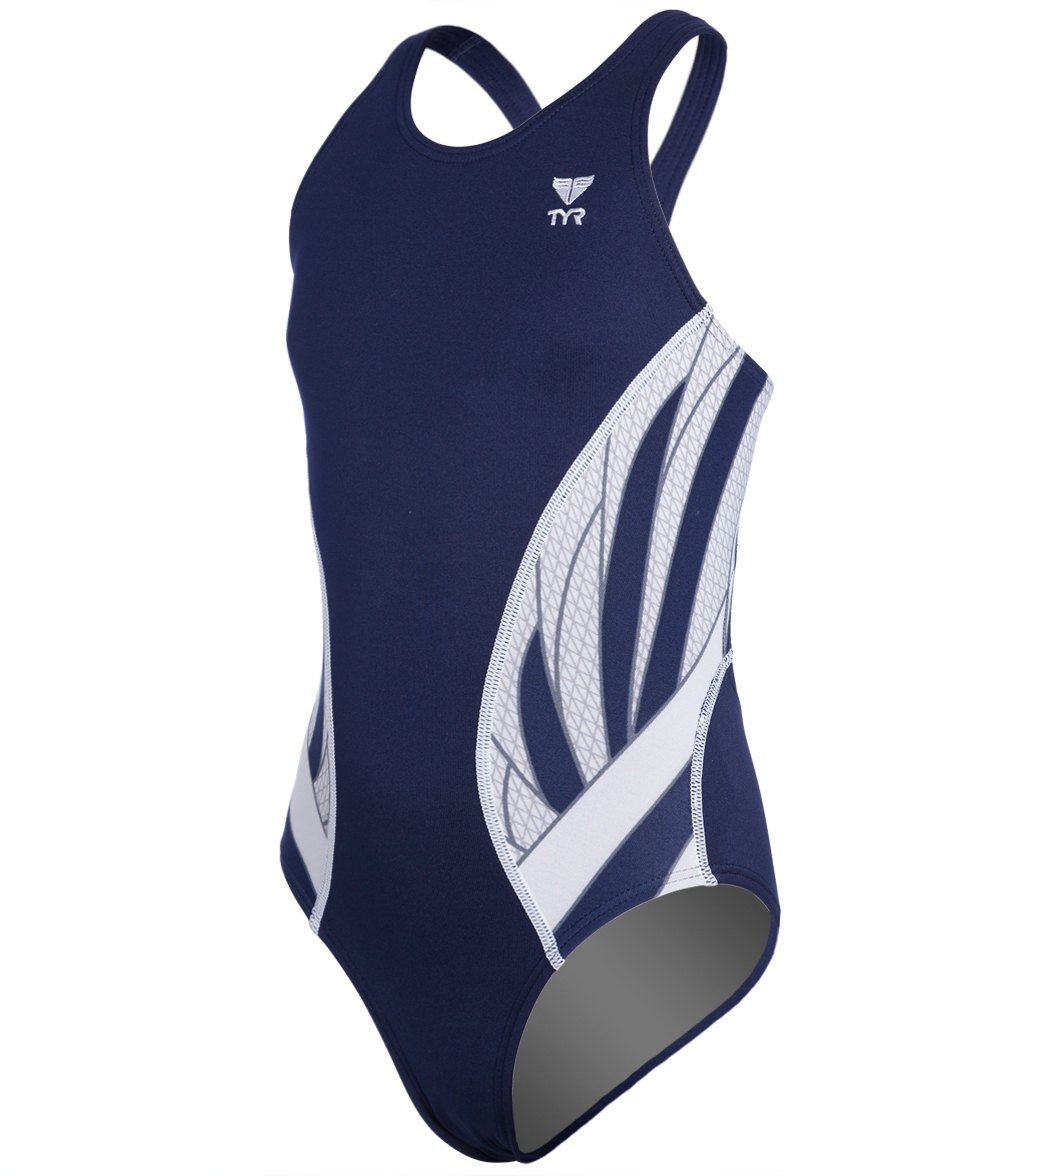 TYR Girls' Phoenix Maxfit One Piece Swimsuit - Navy/White 22 Polyester/Spandex - Swimoutlet.com